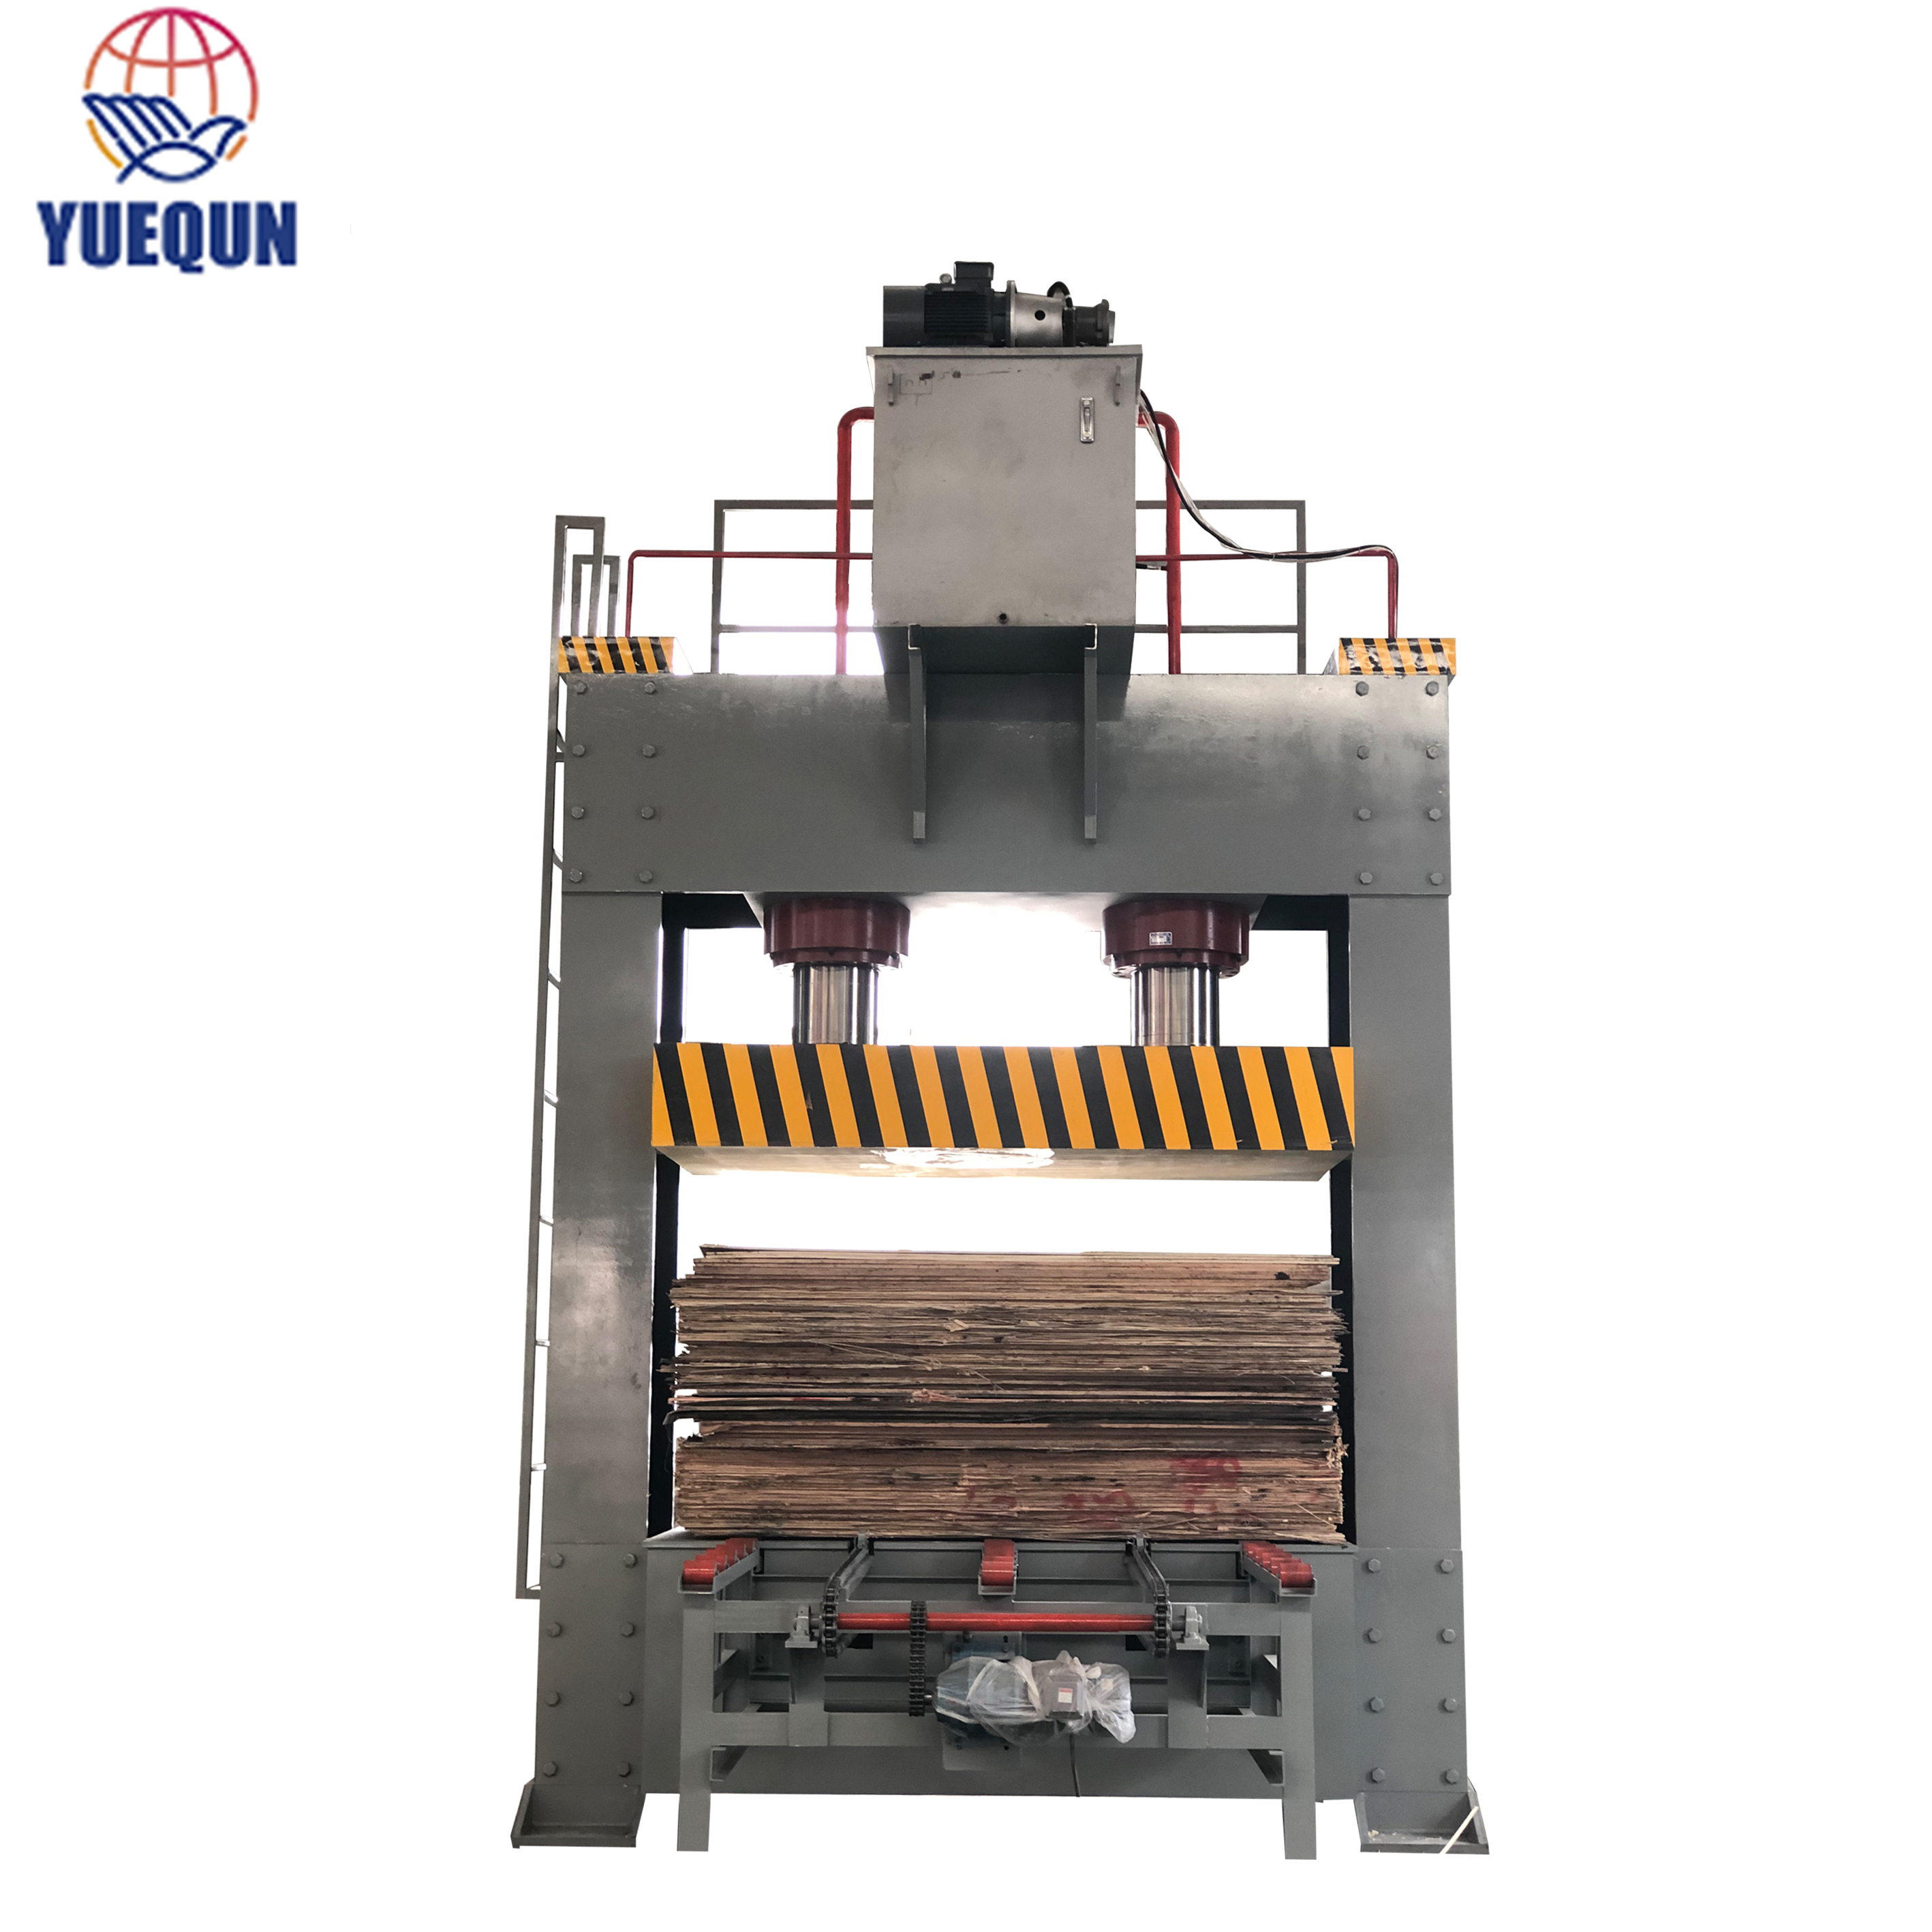 400 Ton wood veneer cold press machine for plywood production line